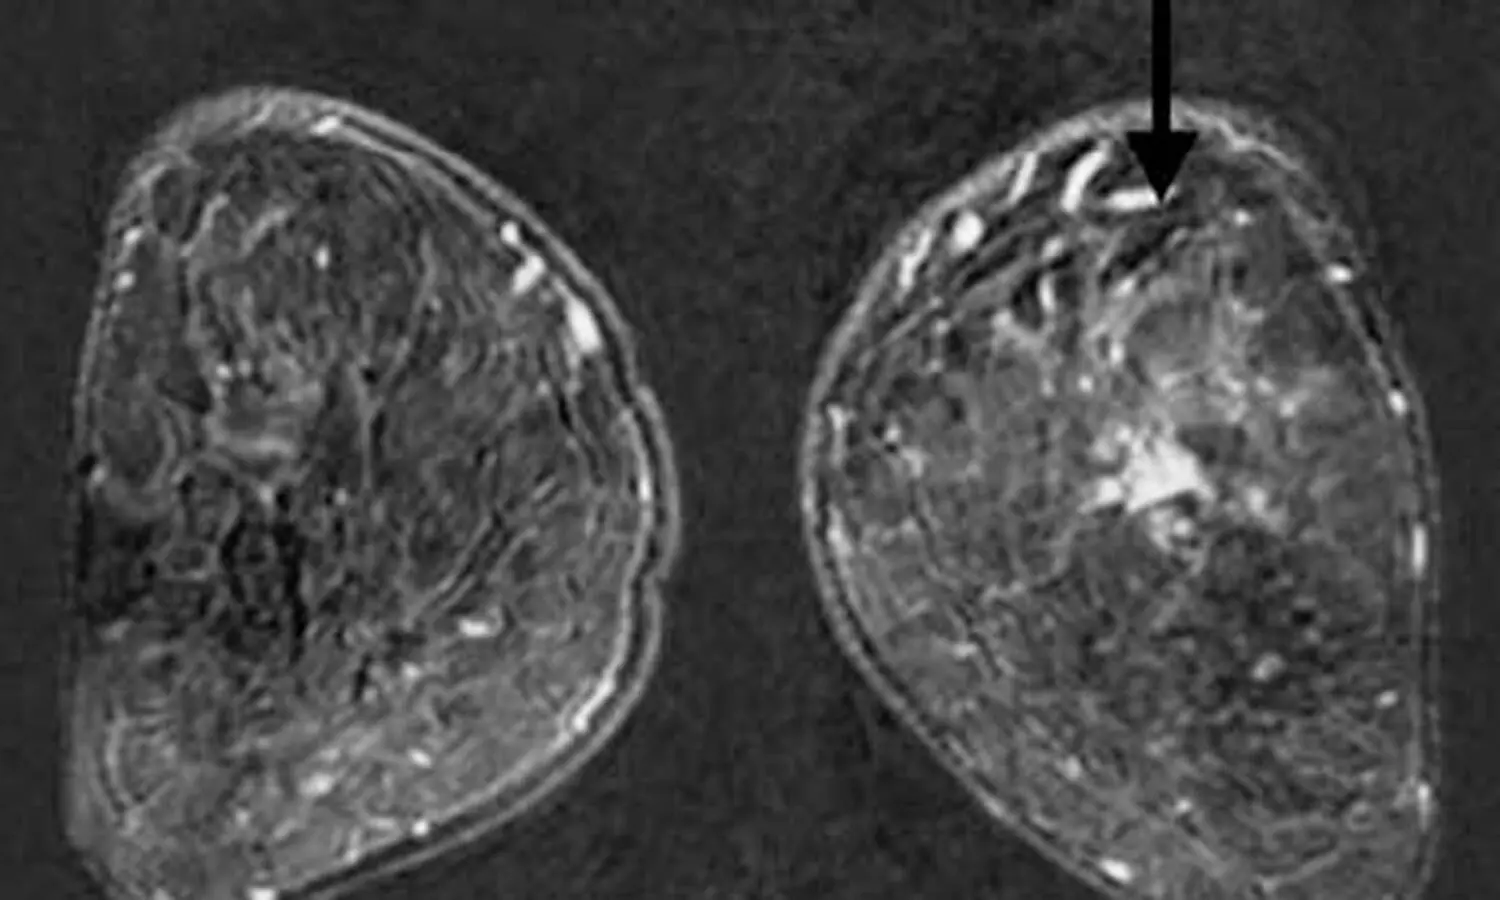 Pre-operative MRI may identify additional breast cancer sites for better management